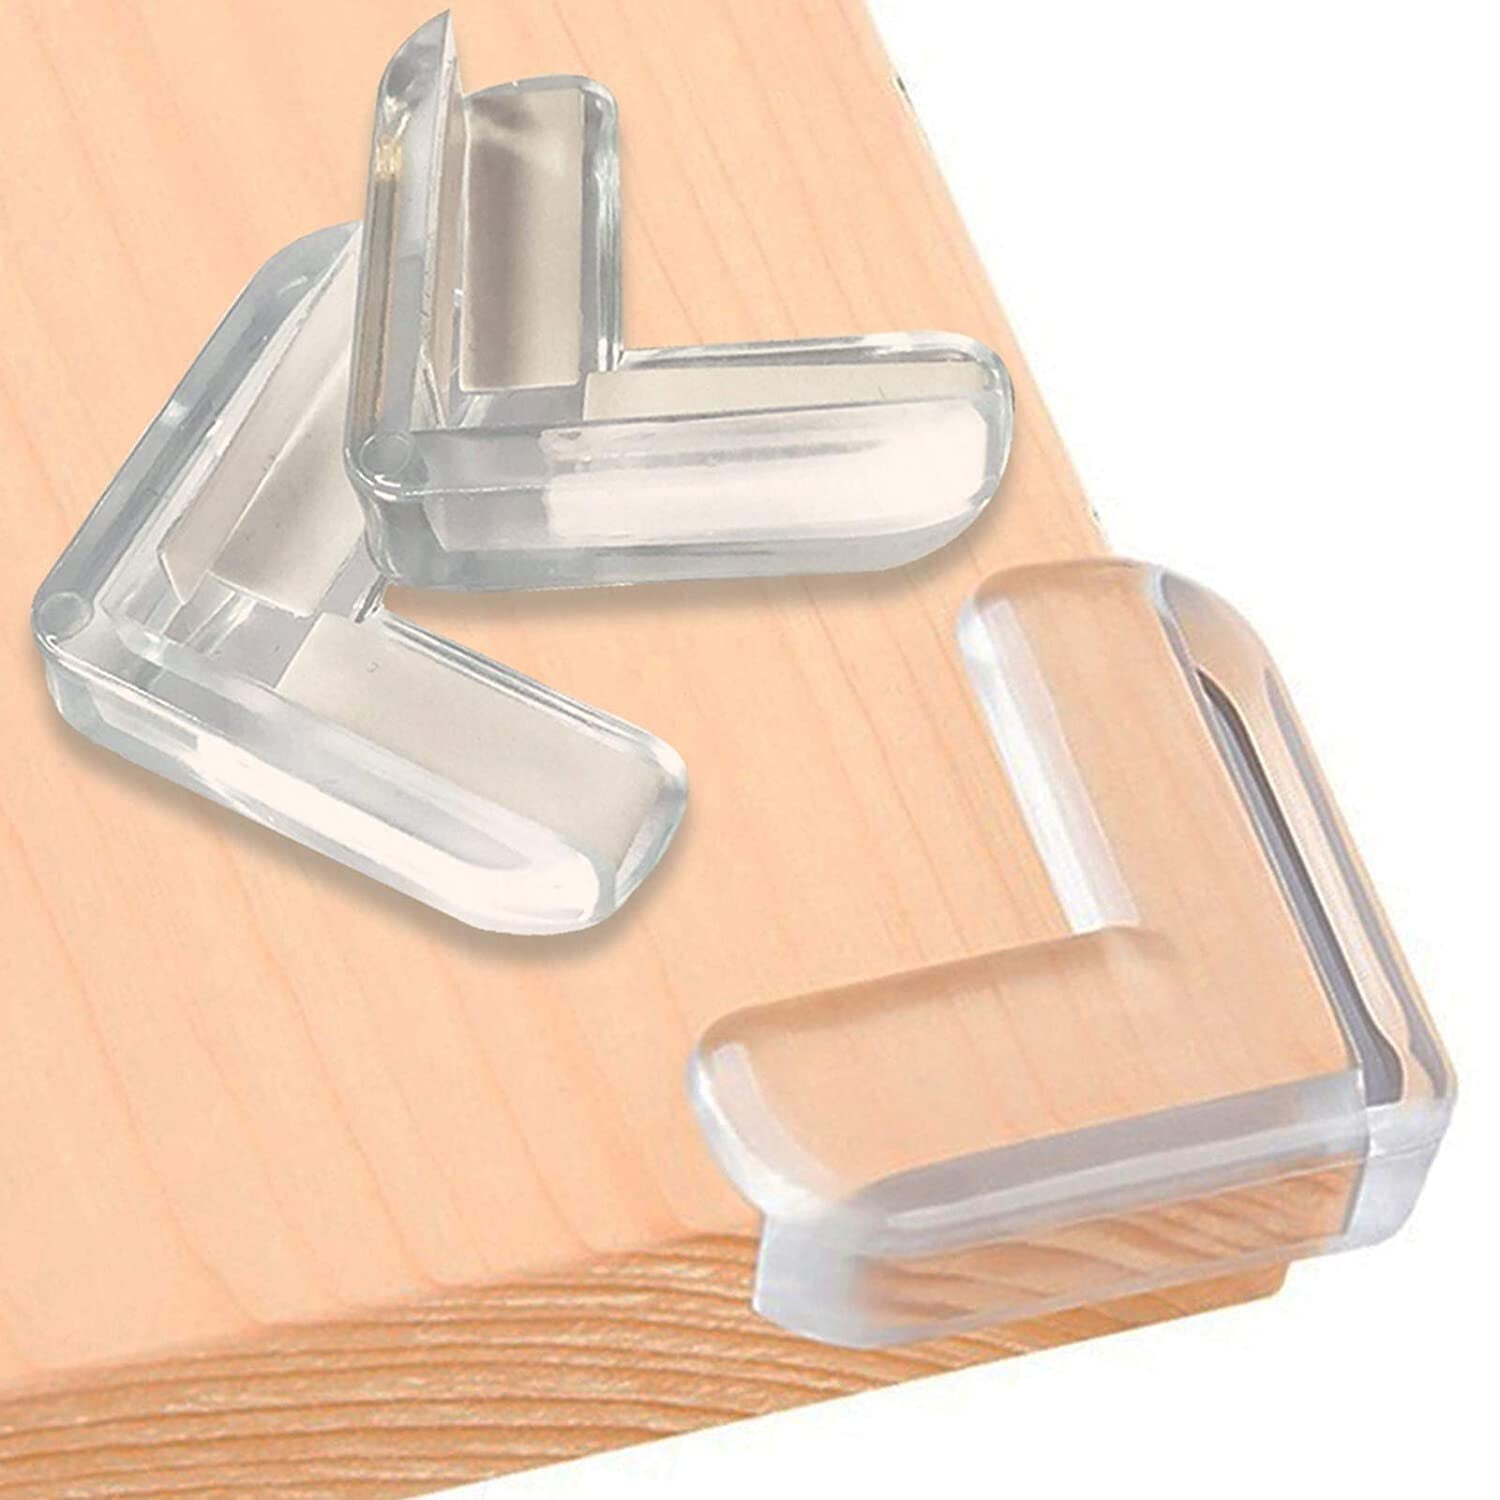 New Corner Guards Baby Safety Clear Furniture Corner Protector 8 pcs 